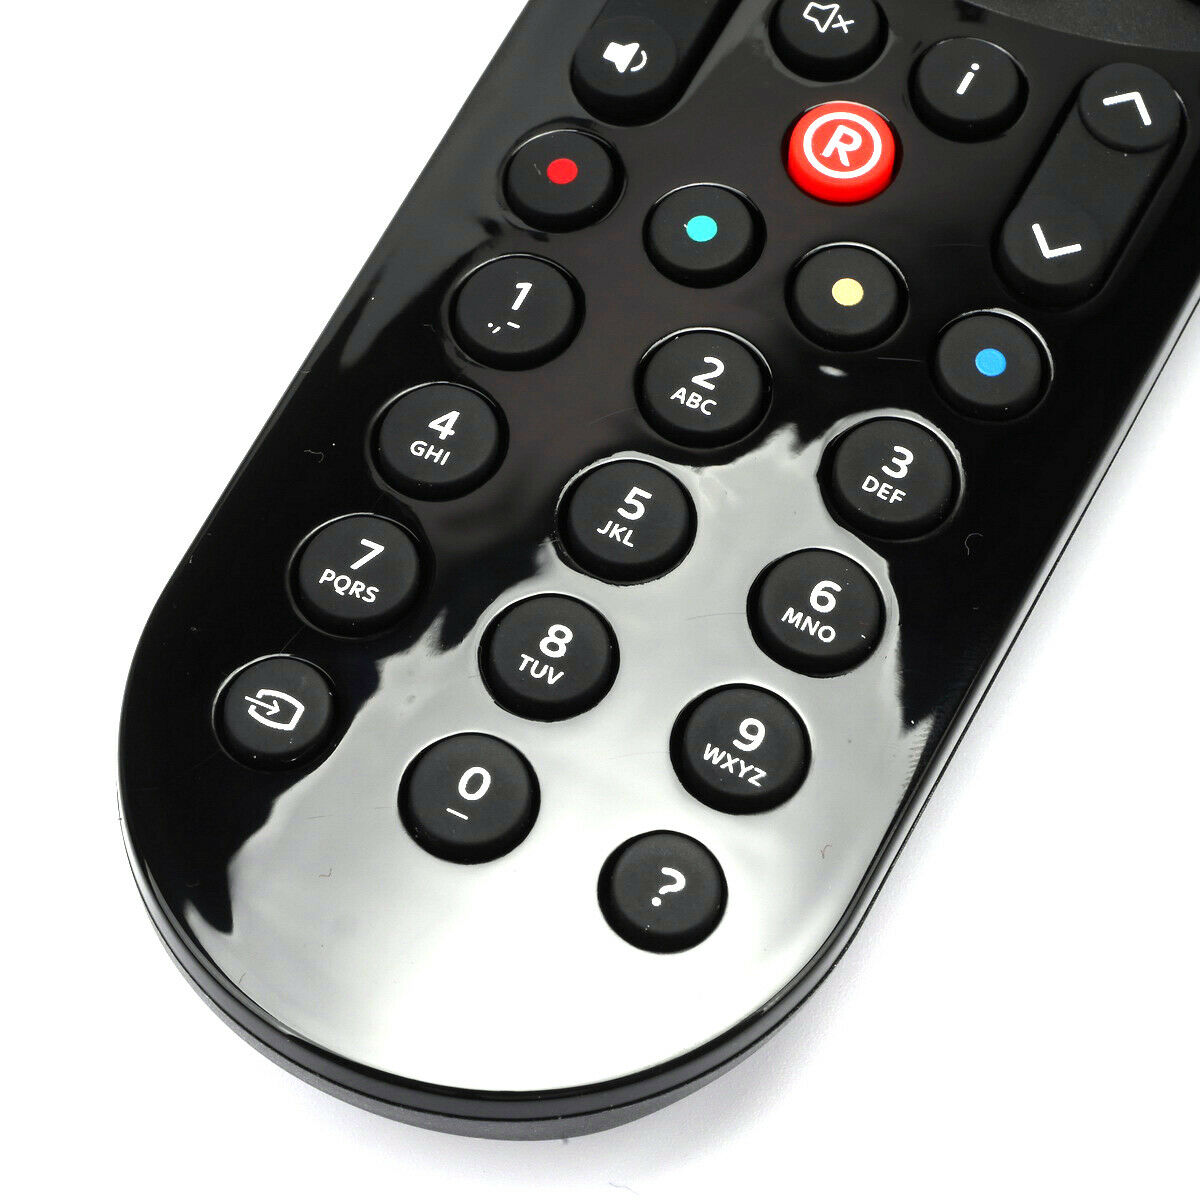 E57065-Universal-Replacement-Infrared-Remote-Control-For-Sky-Q-Version-2-TV-Box-1671331